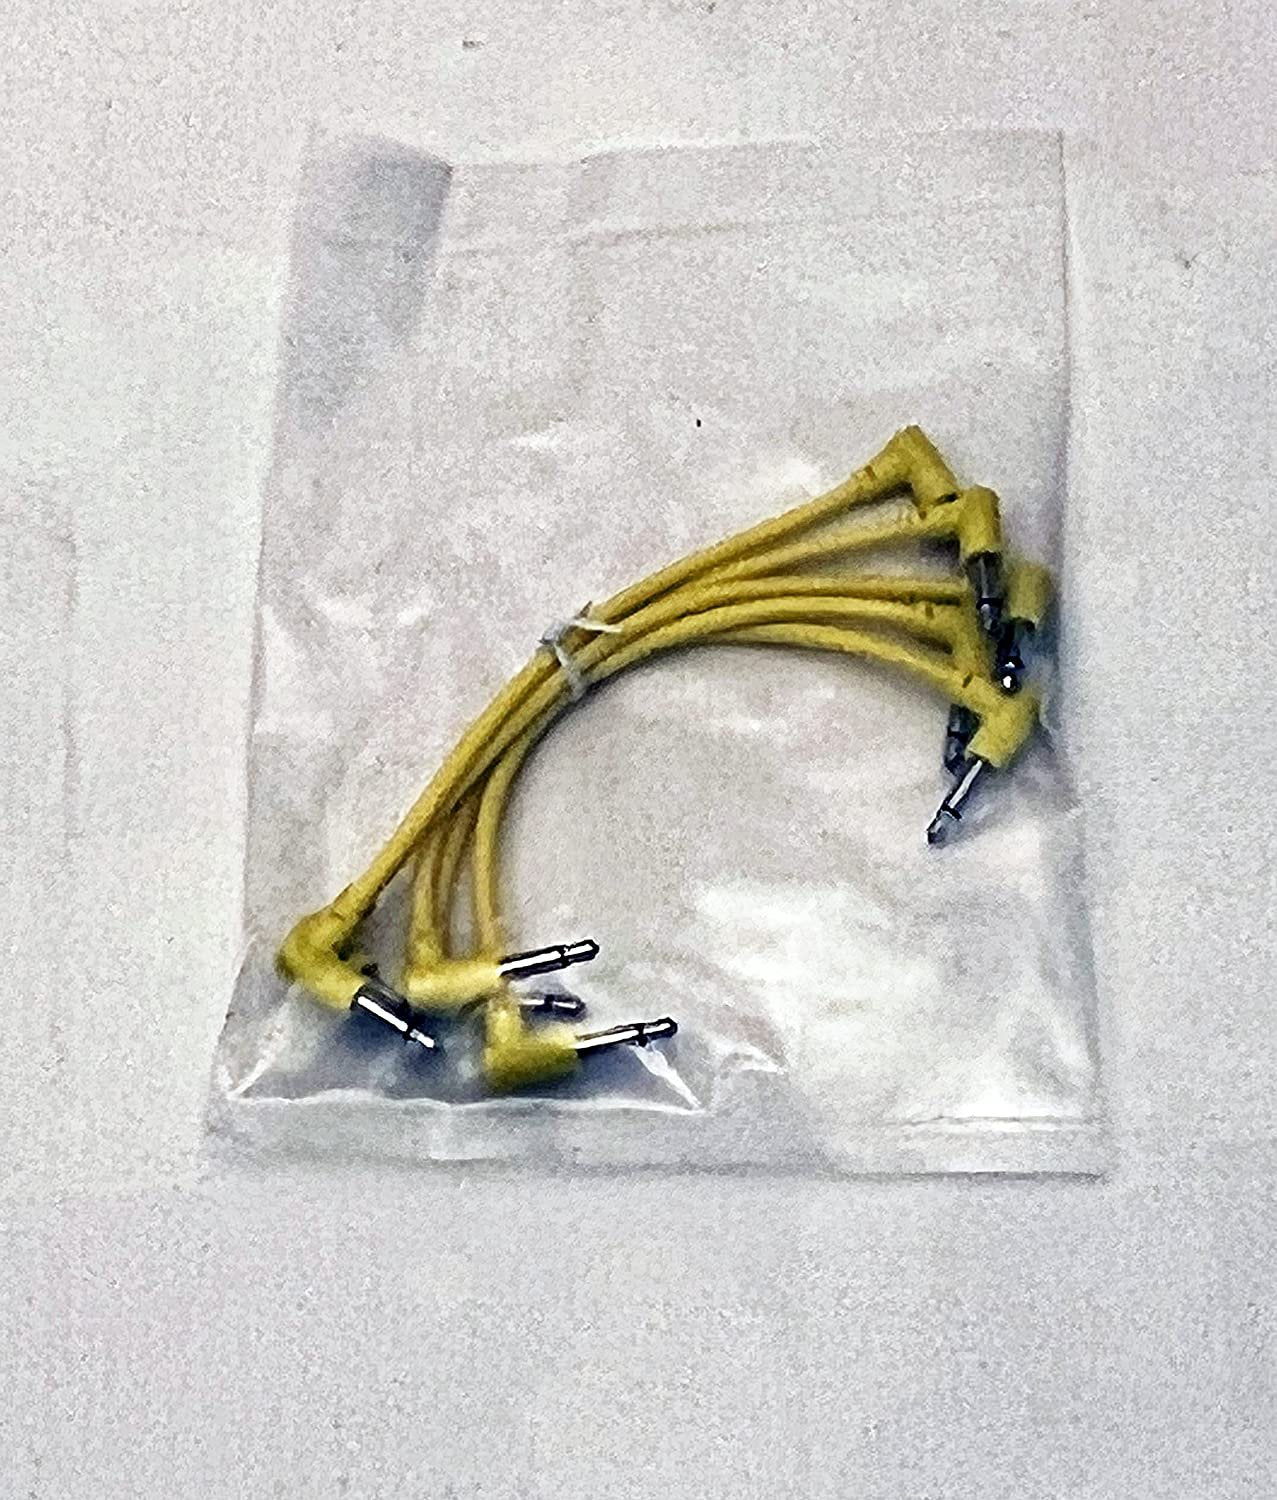 Luigis Modular M-PAR Right Angled Eurorack Patch Cables - Package of 5 Yellow Cables, 4 (10 cm)